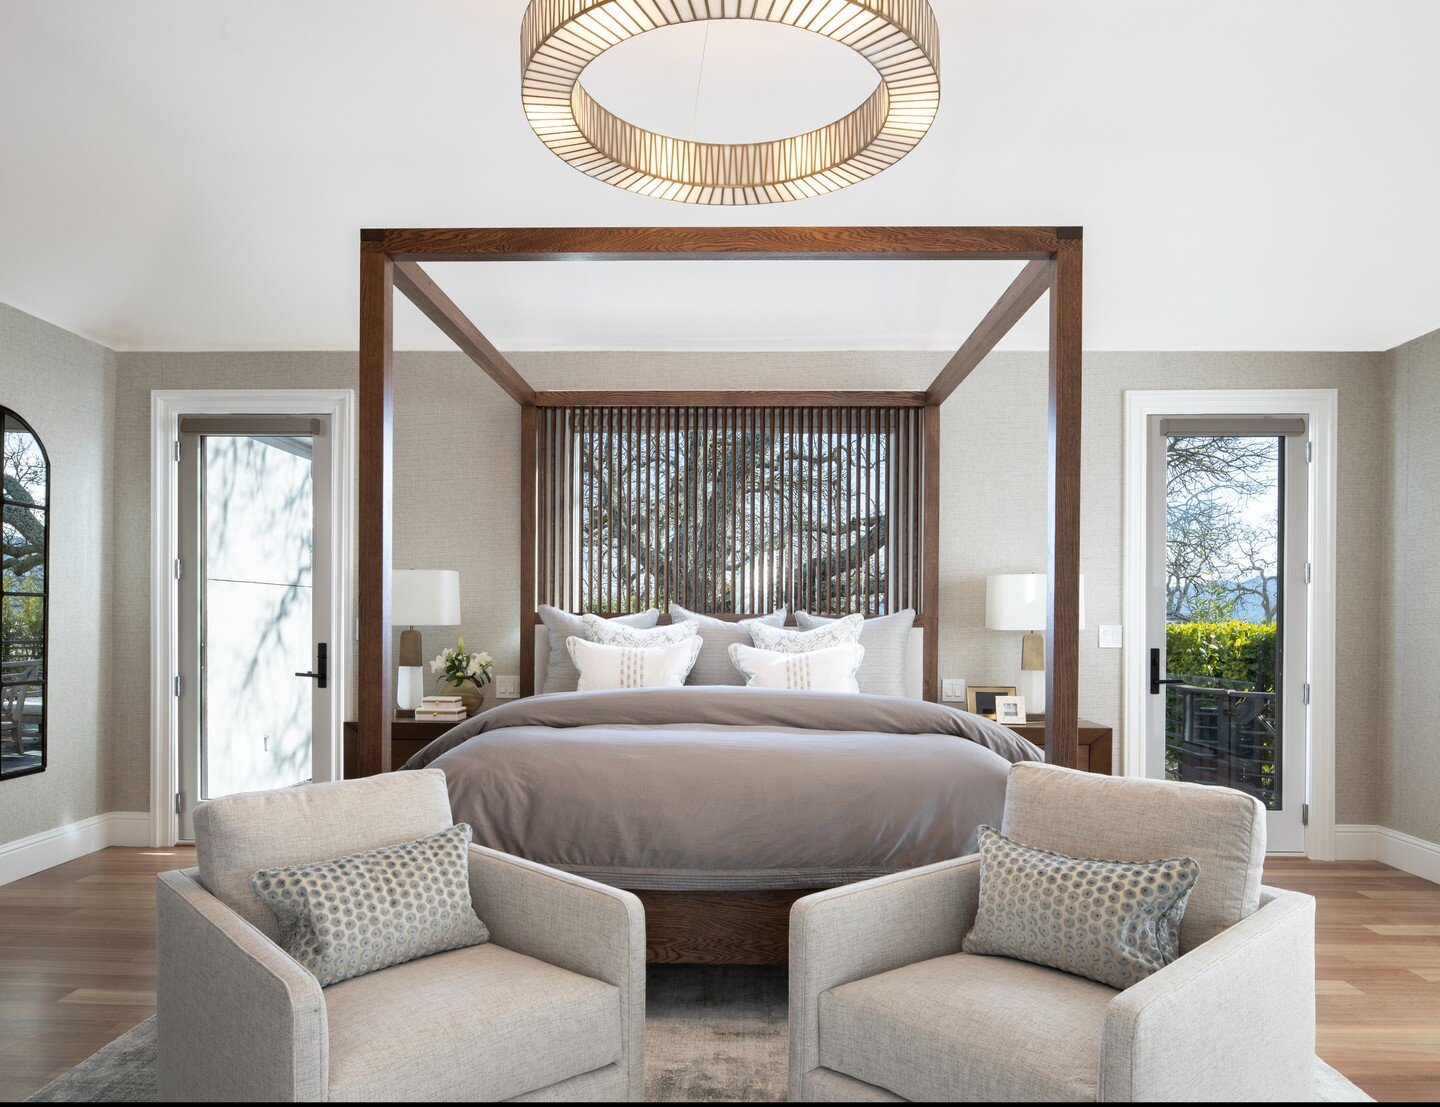 What to do when the Primary Suite has no bed wall...? We love how the bed frame lets just enough view through to show off this majestic oak.
.
.
#primarybedroom #mastersuite #canopybed #neutralinteriors #restfulbedroom #homerenovation #houseonahill #